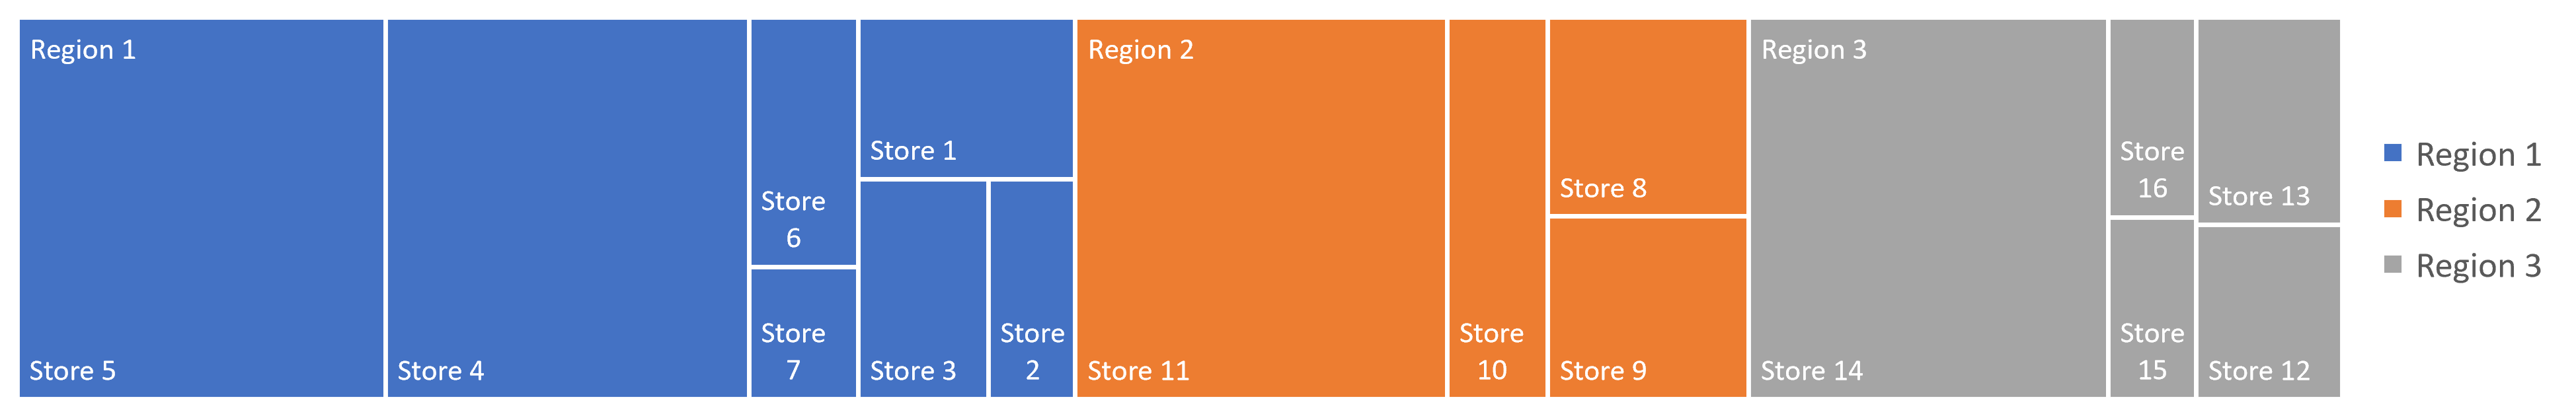 Tree map showing relative contribution of stores within regions